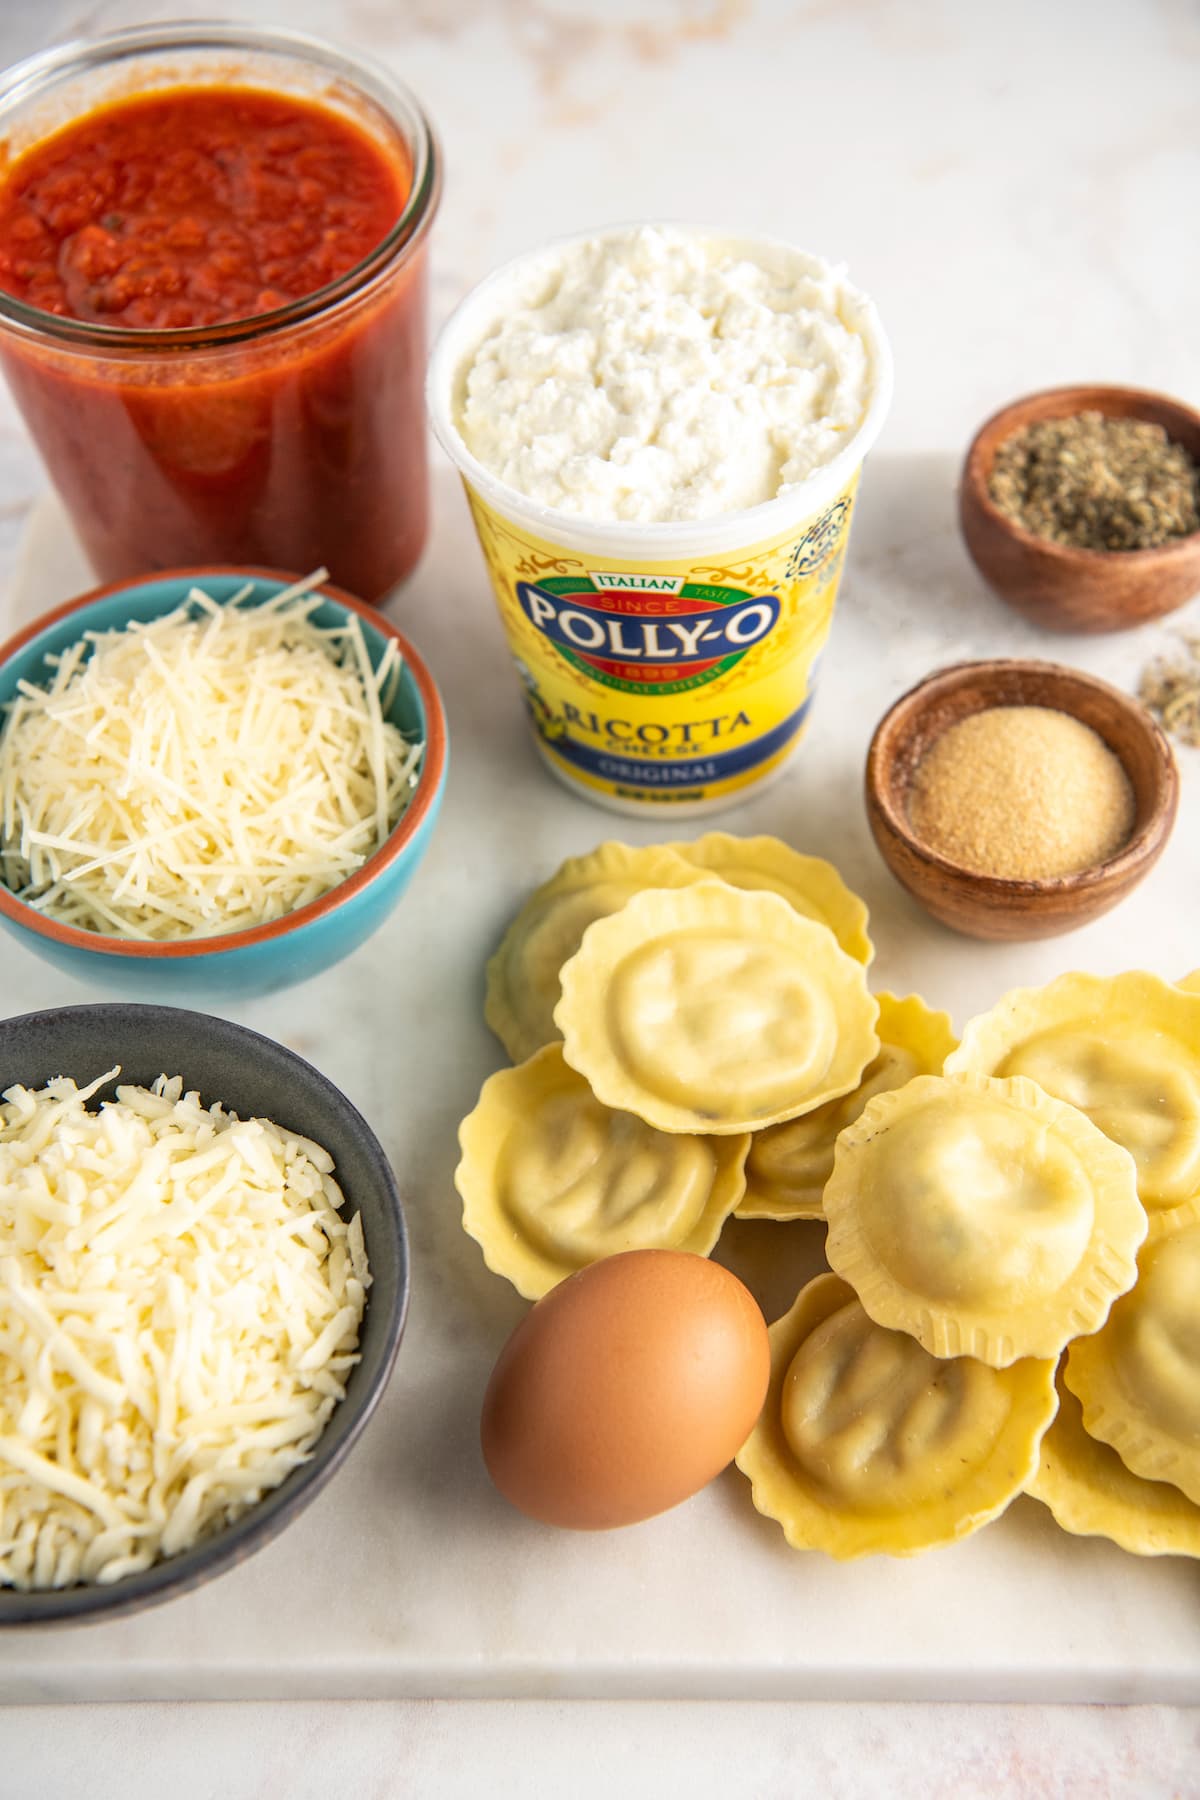 All the ingredients needed for ravioli lasagna: a pile of fresh ravioli, an egg, a carton of ricotta, a bowl of shredded parmesan, a bowl of shredded mozzarella, a jar of tomato sauce, a bowl of garlic powder, and a bowl of Italian seasoning